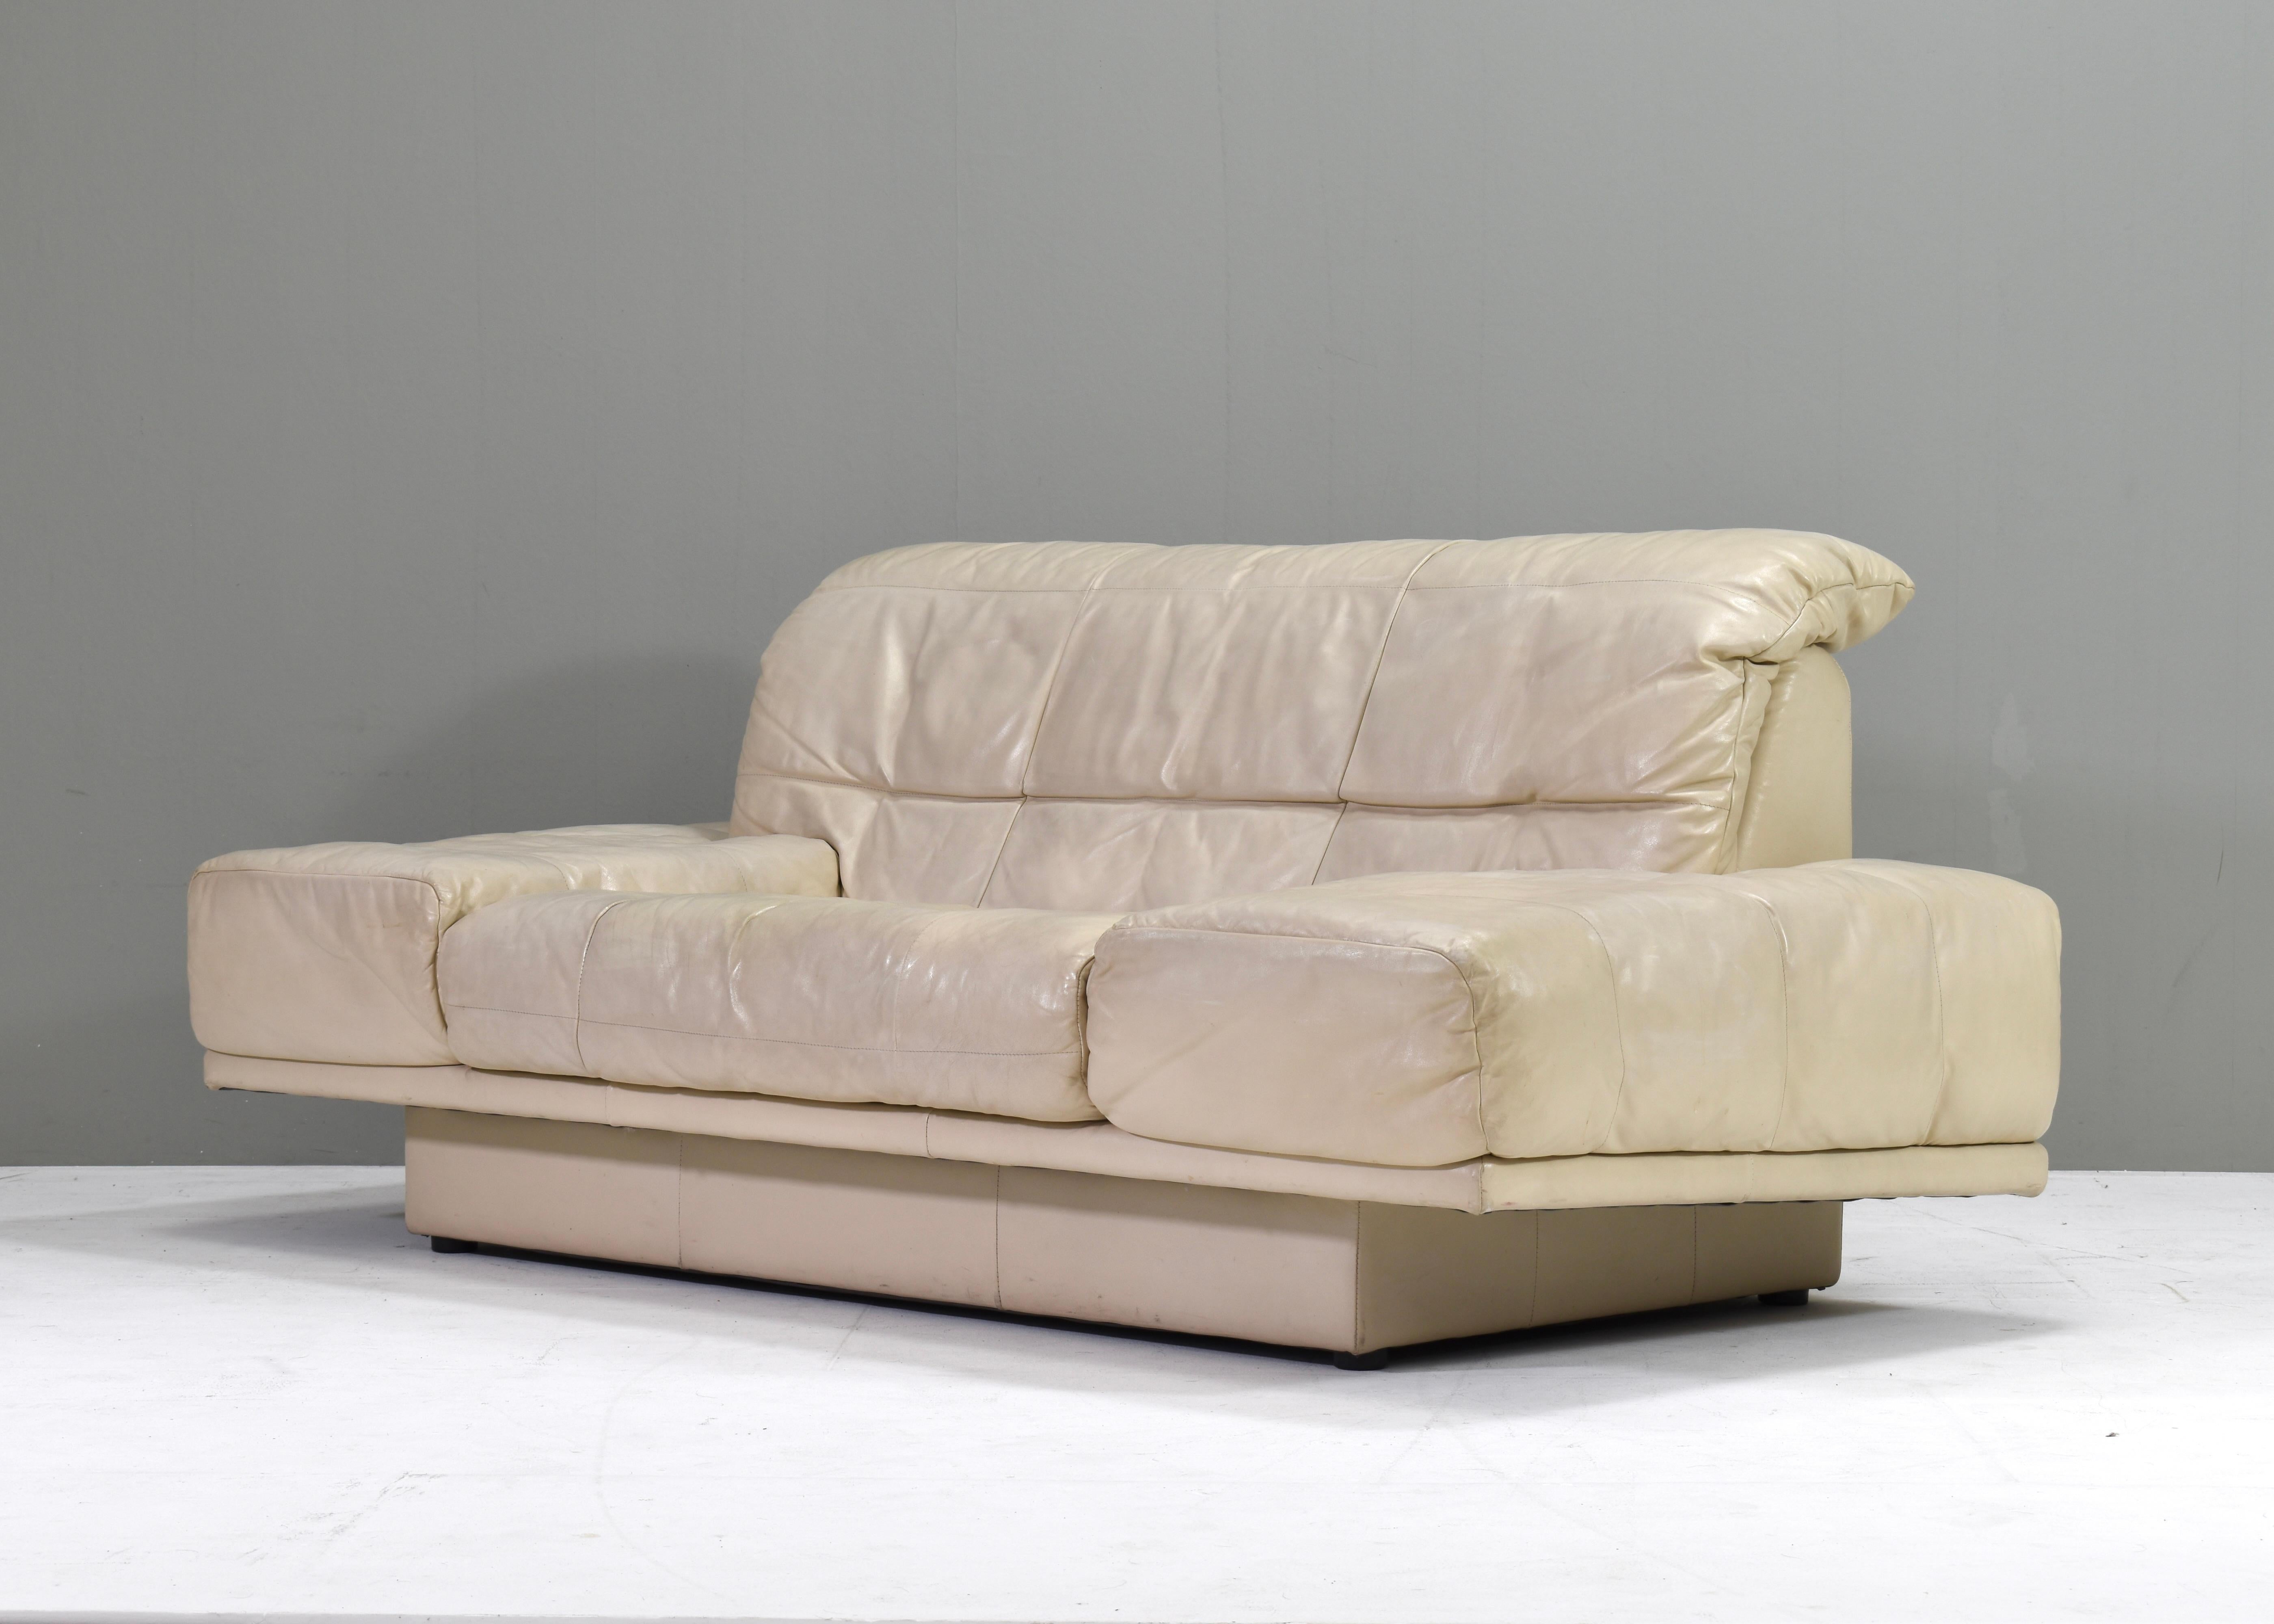 Rolf Benz 2-seat sofa in Ivory Cream White Leather – Germany, circa 1980-1990 In Good Condition For Sale In Pijnacker, Zuid-Holland